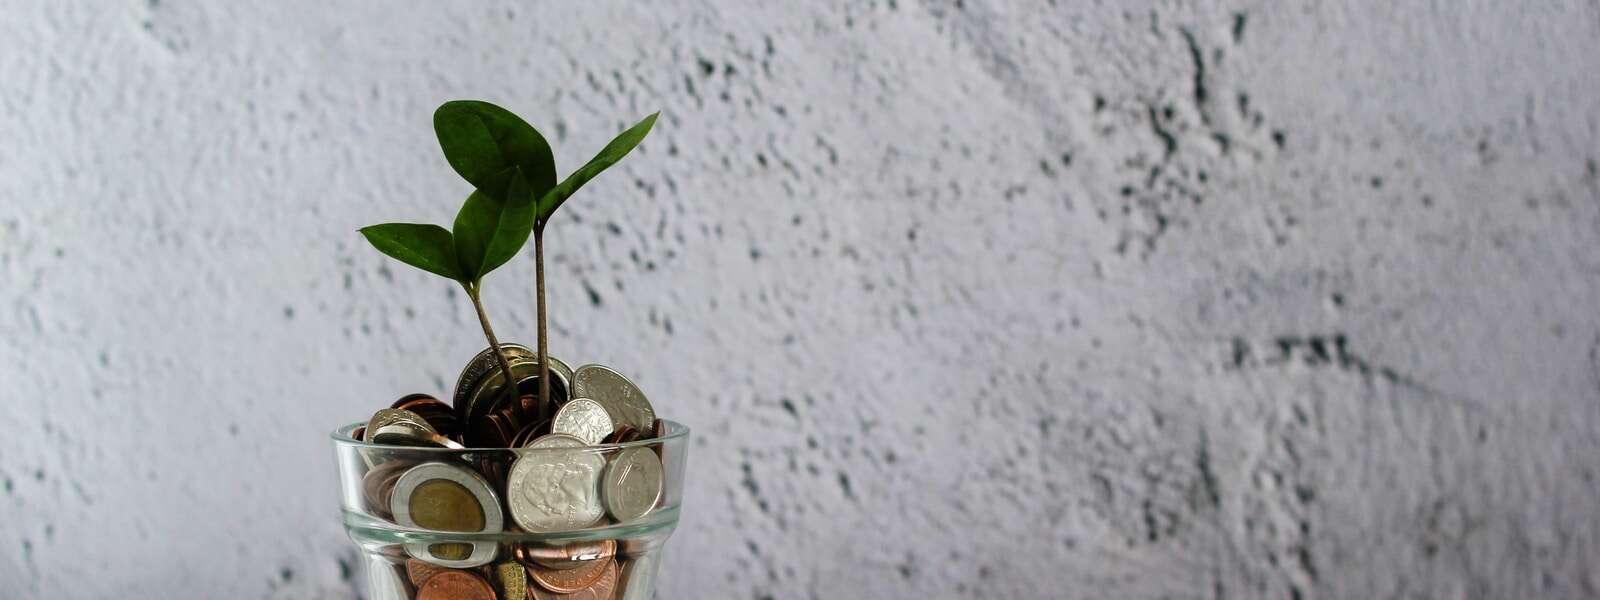 A money tree is potted in a glass filled with coins.